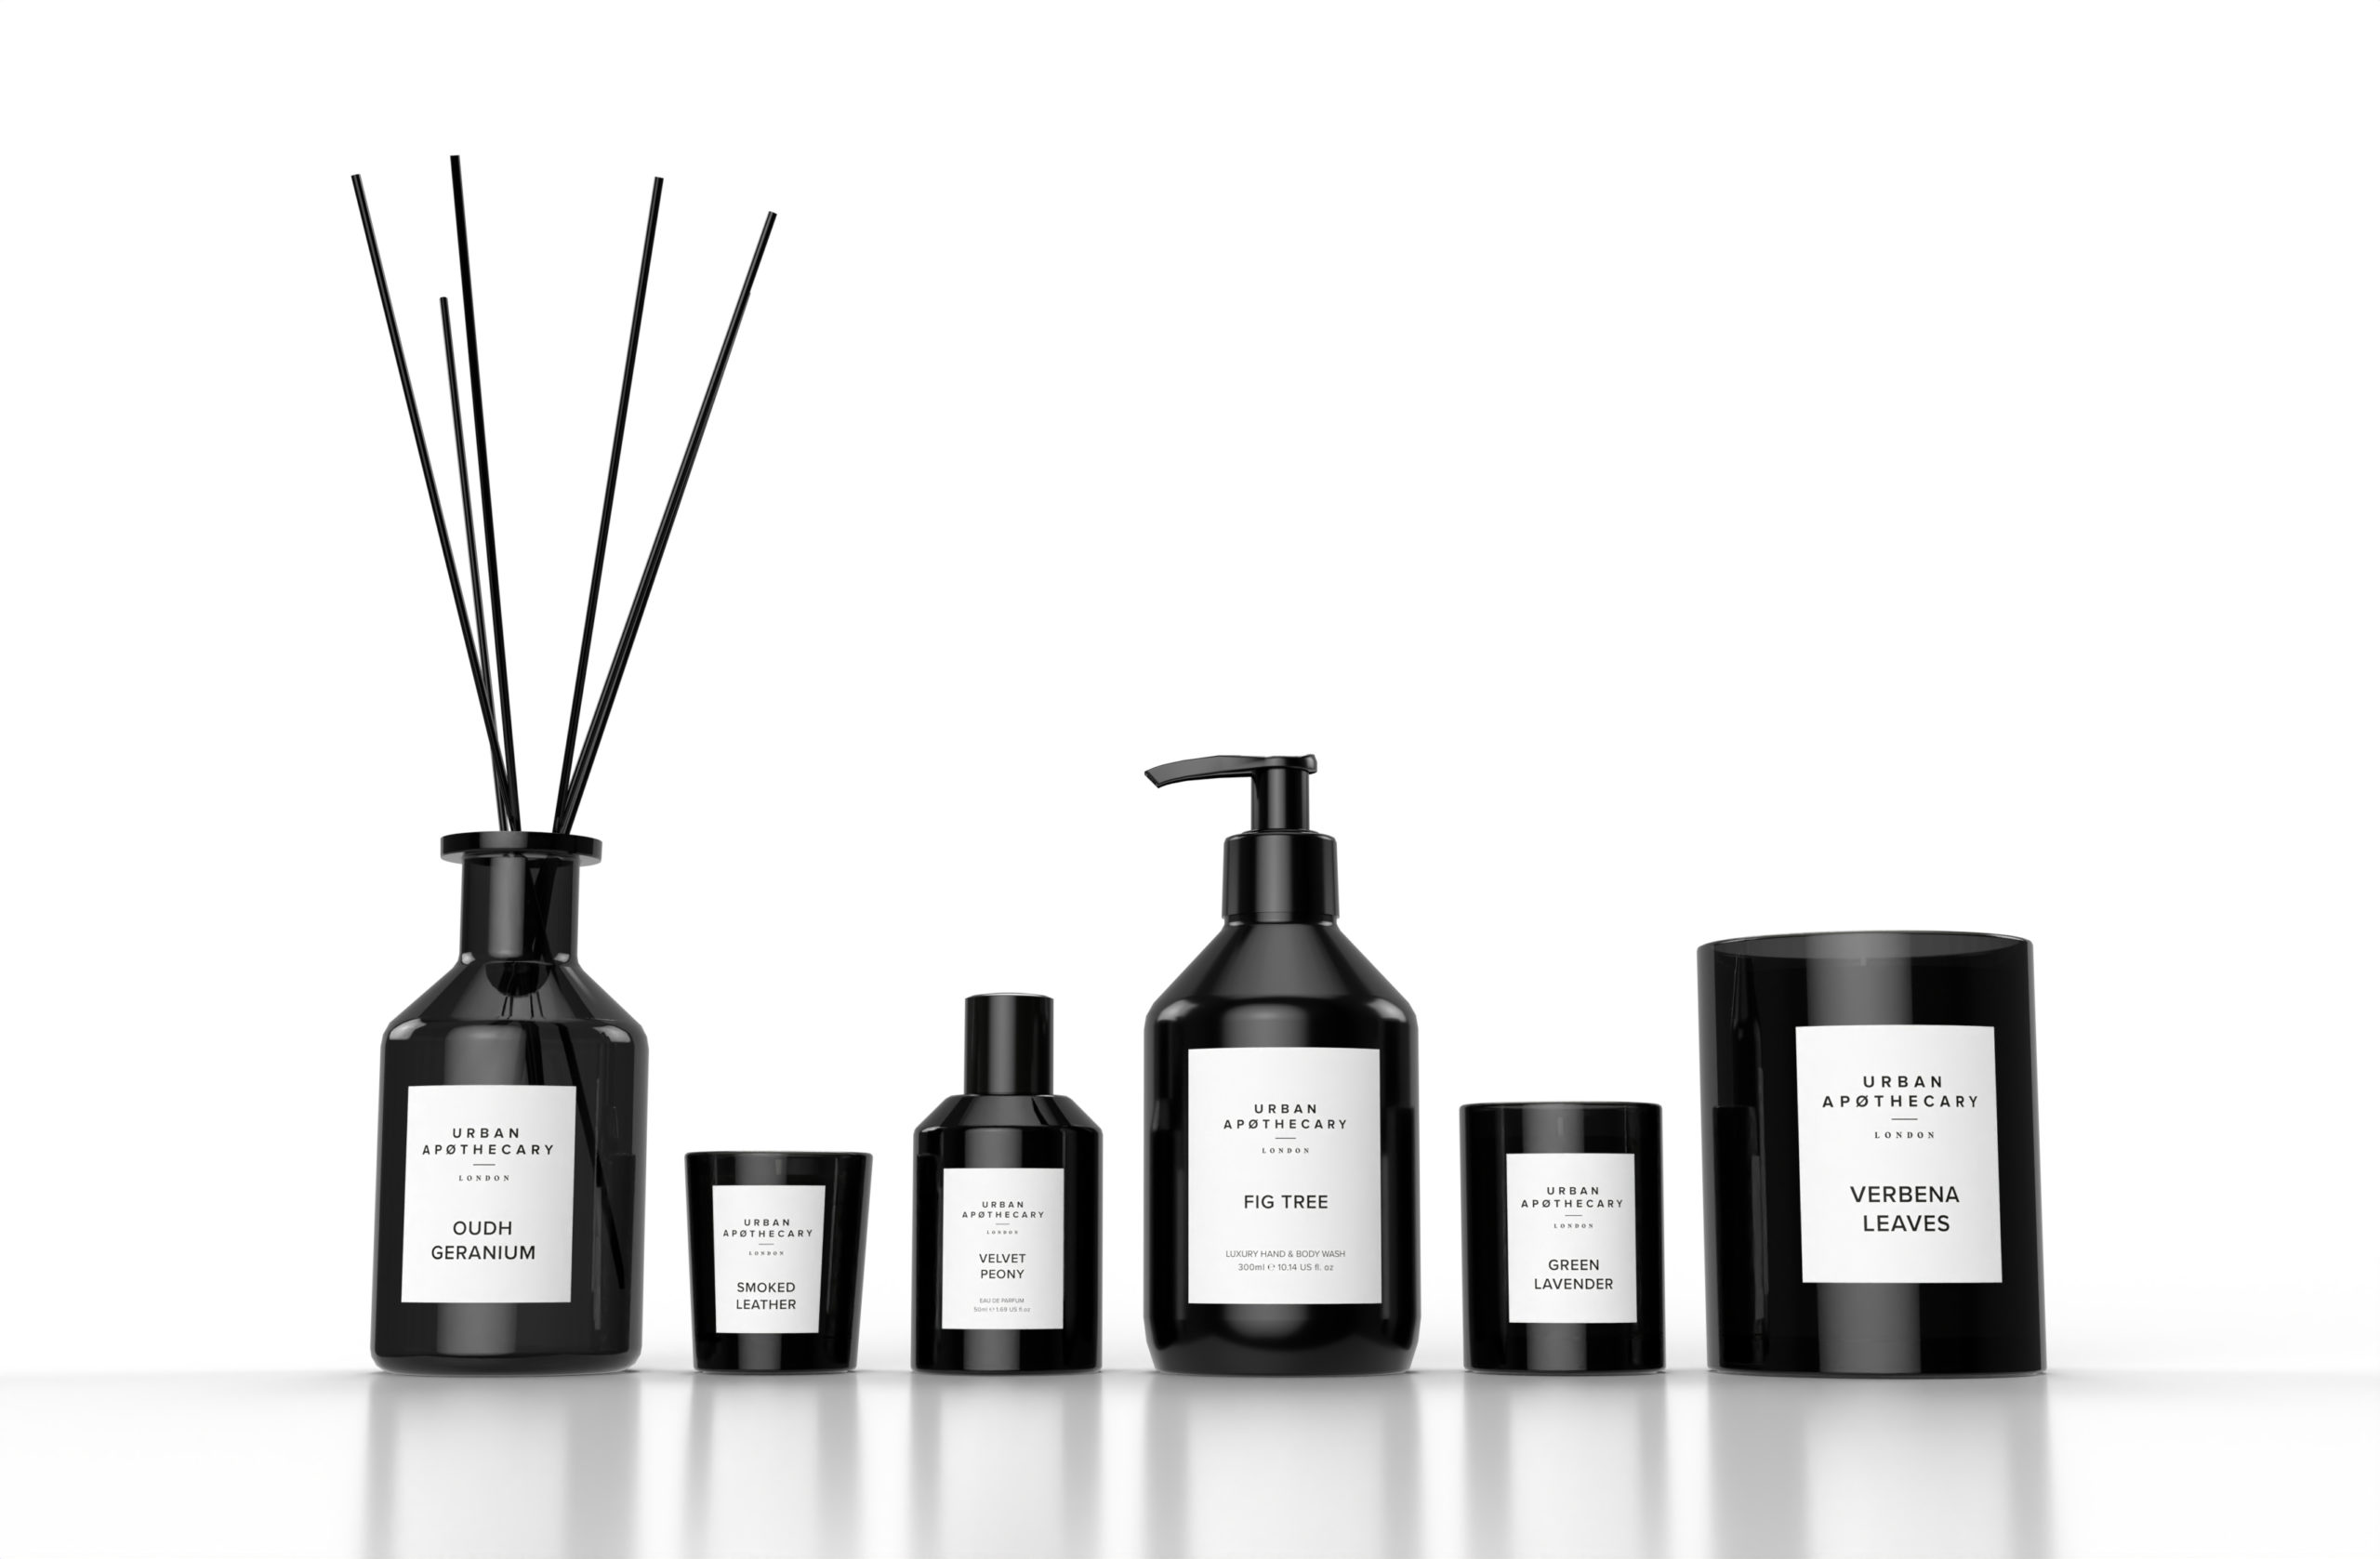 Line-up of home fragrance products featuring multiple examples of home fragrance artworks.